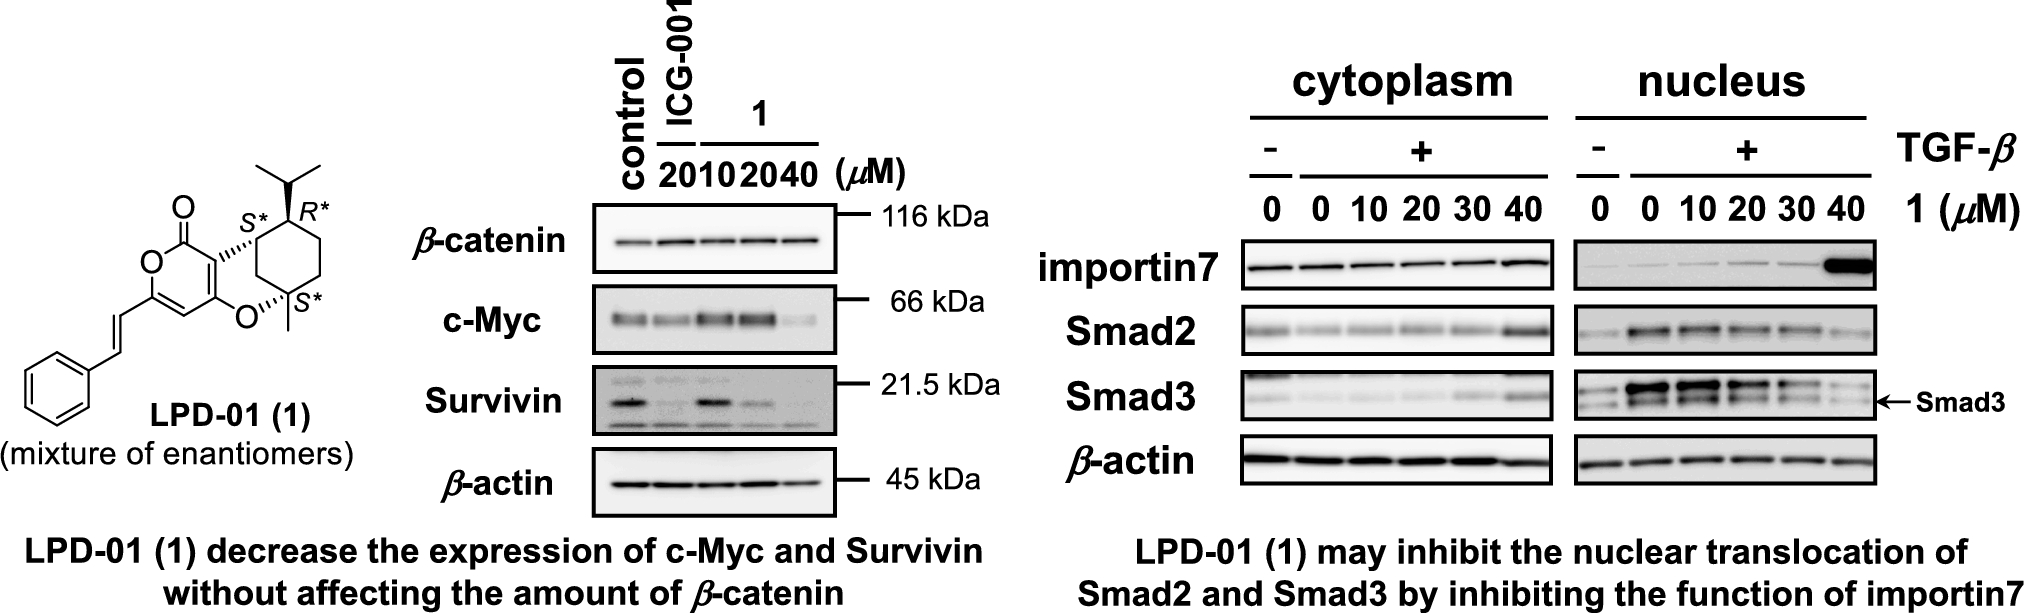 Linderapyrone analogue LPD-01 as a cancer treatment agent by targeting importin7